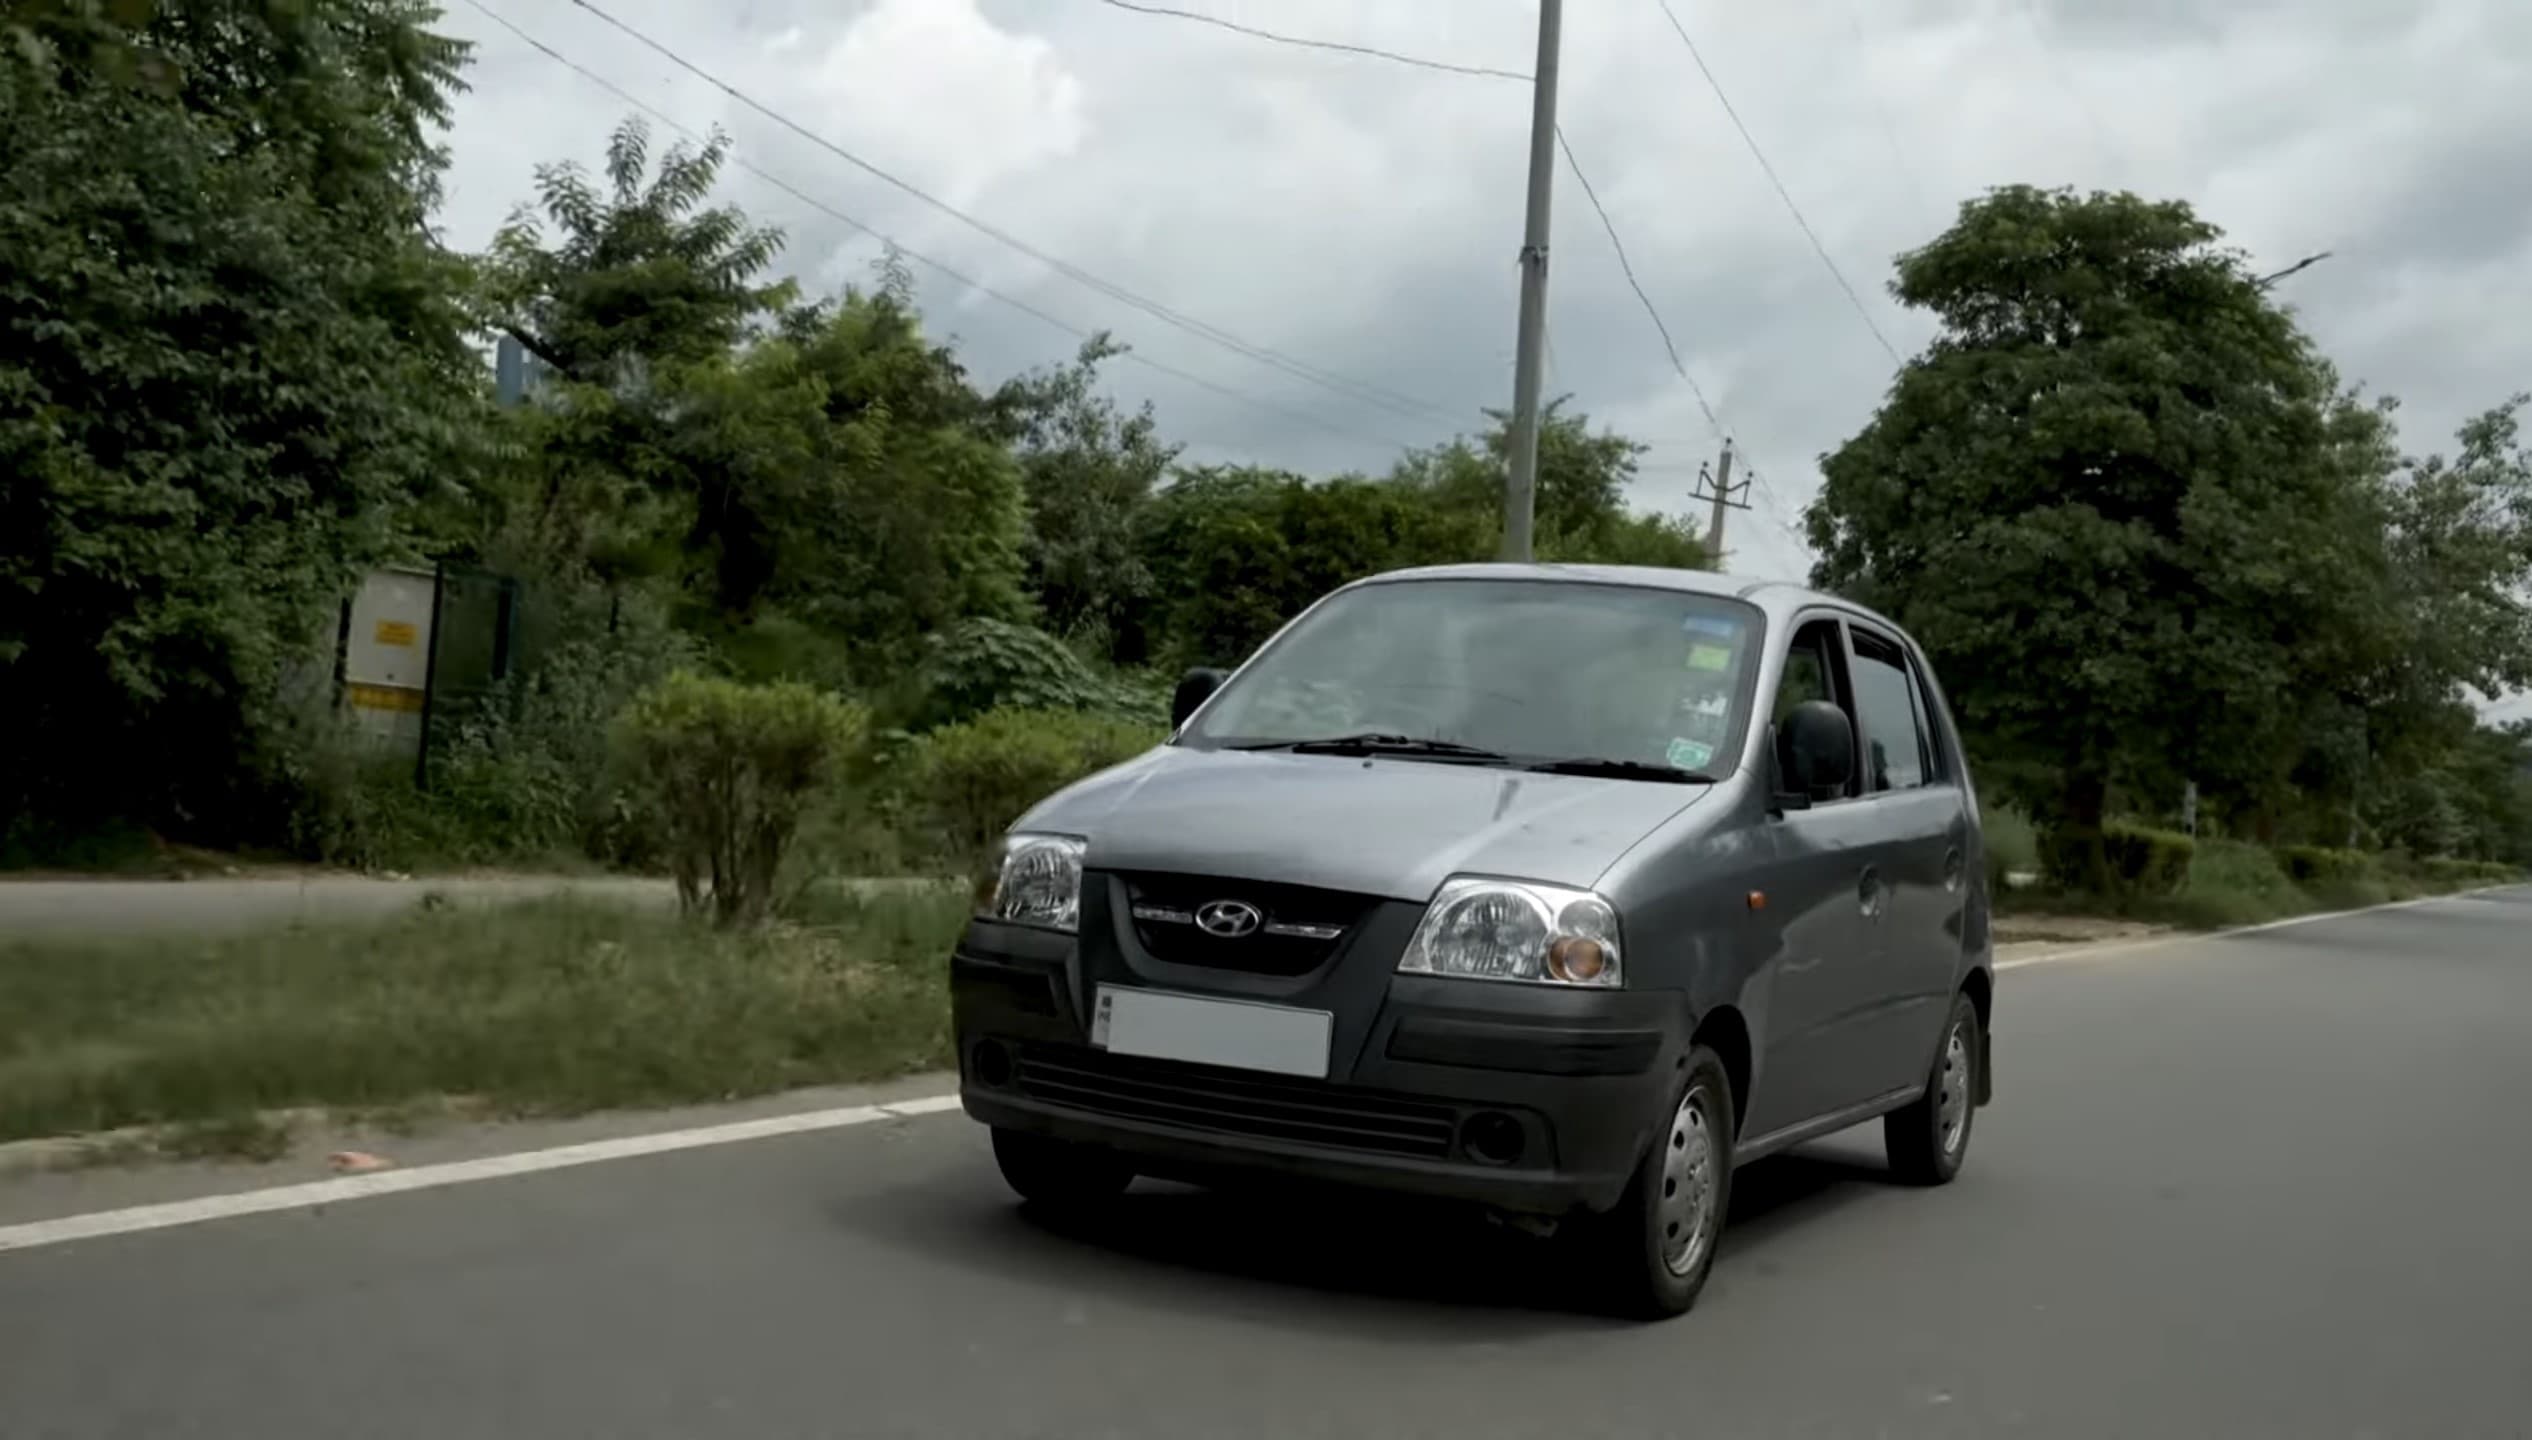 The santro which was converted from petrol to electric